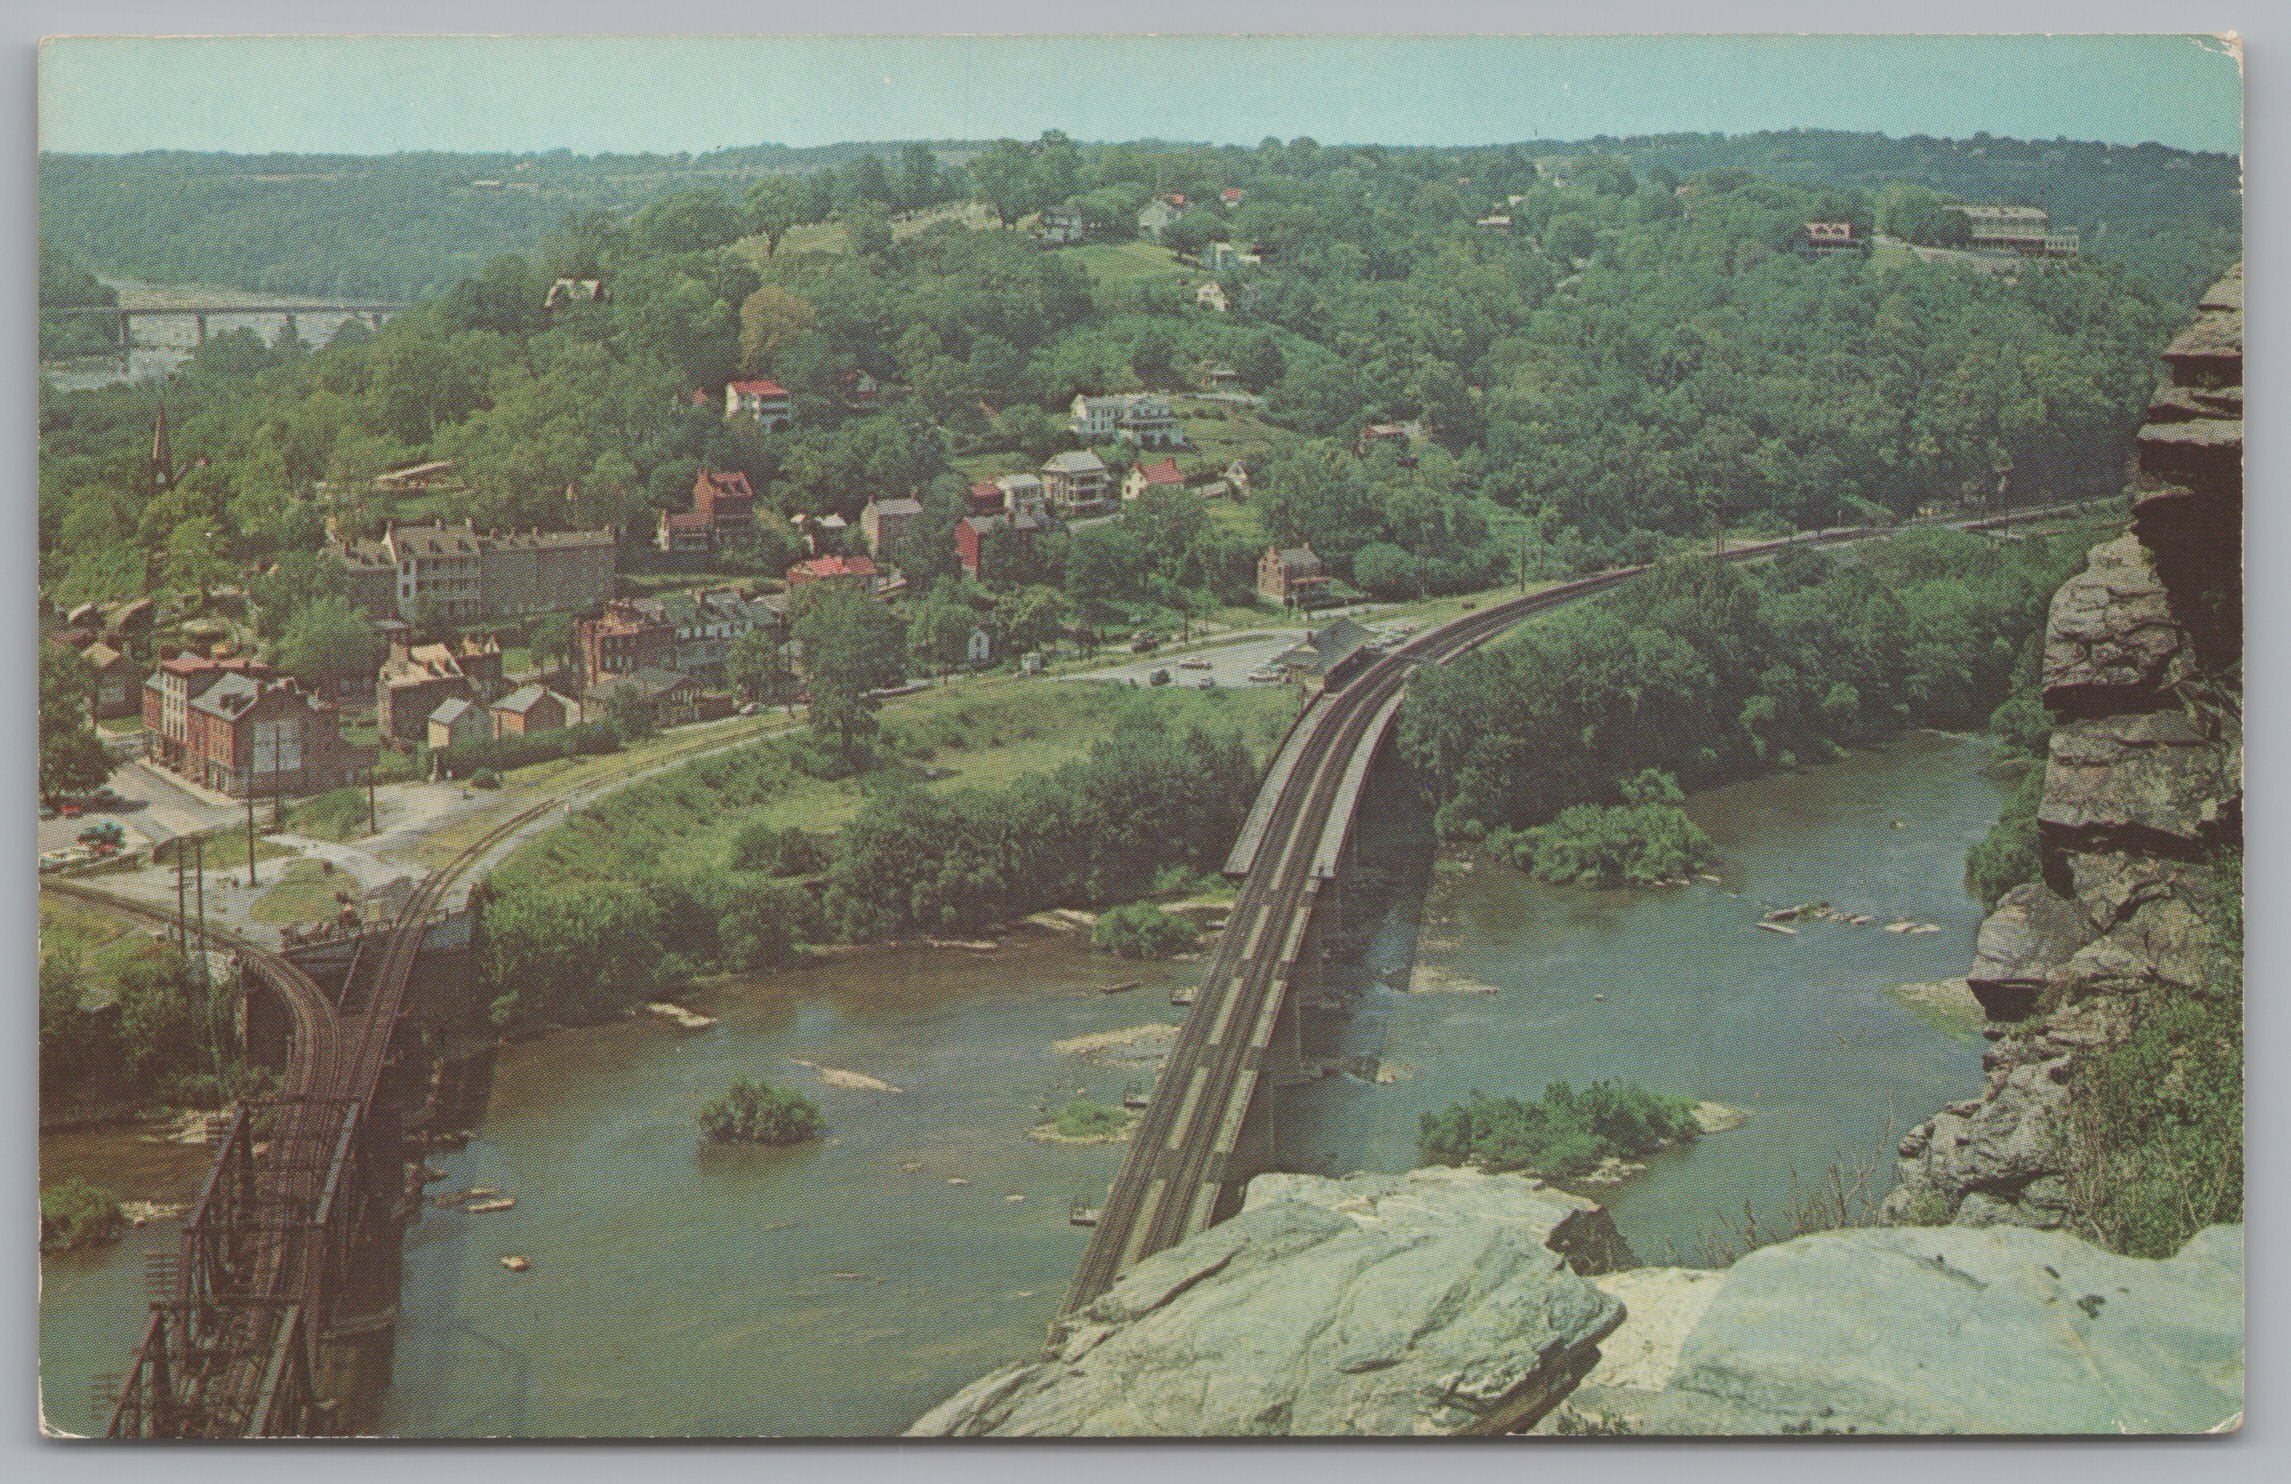 Harpers Ferry, Where The 3 States Meet, West Virginia, Maryland, Virginia, VTG PC